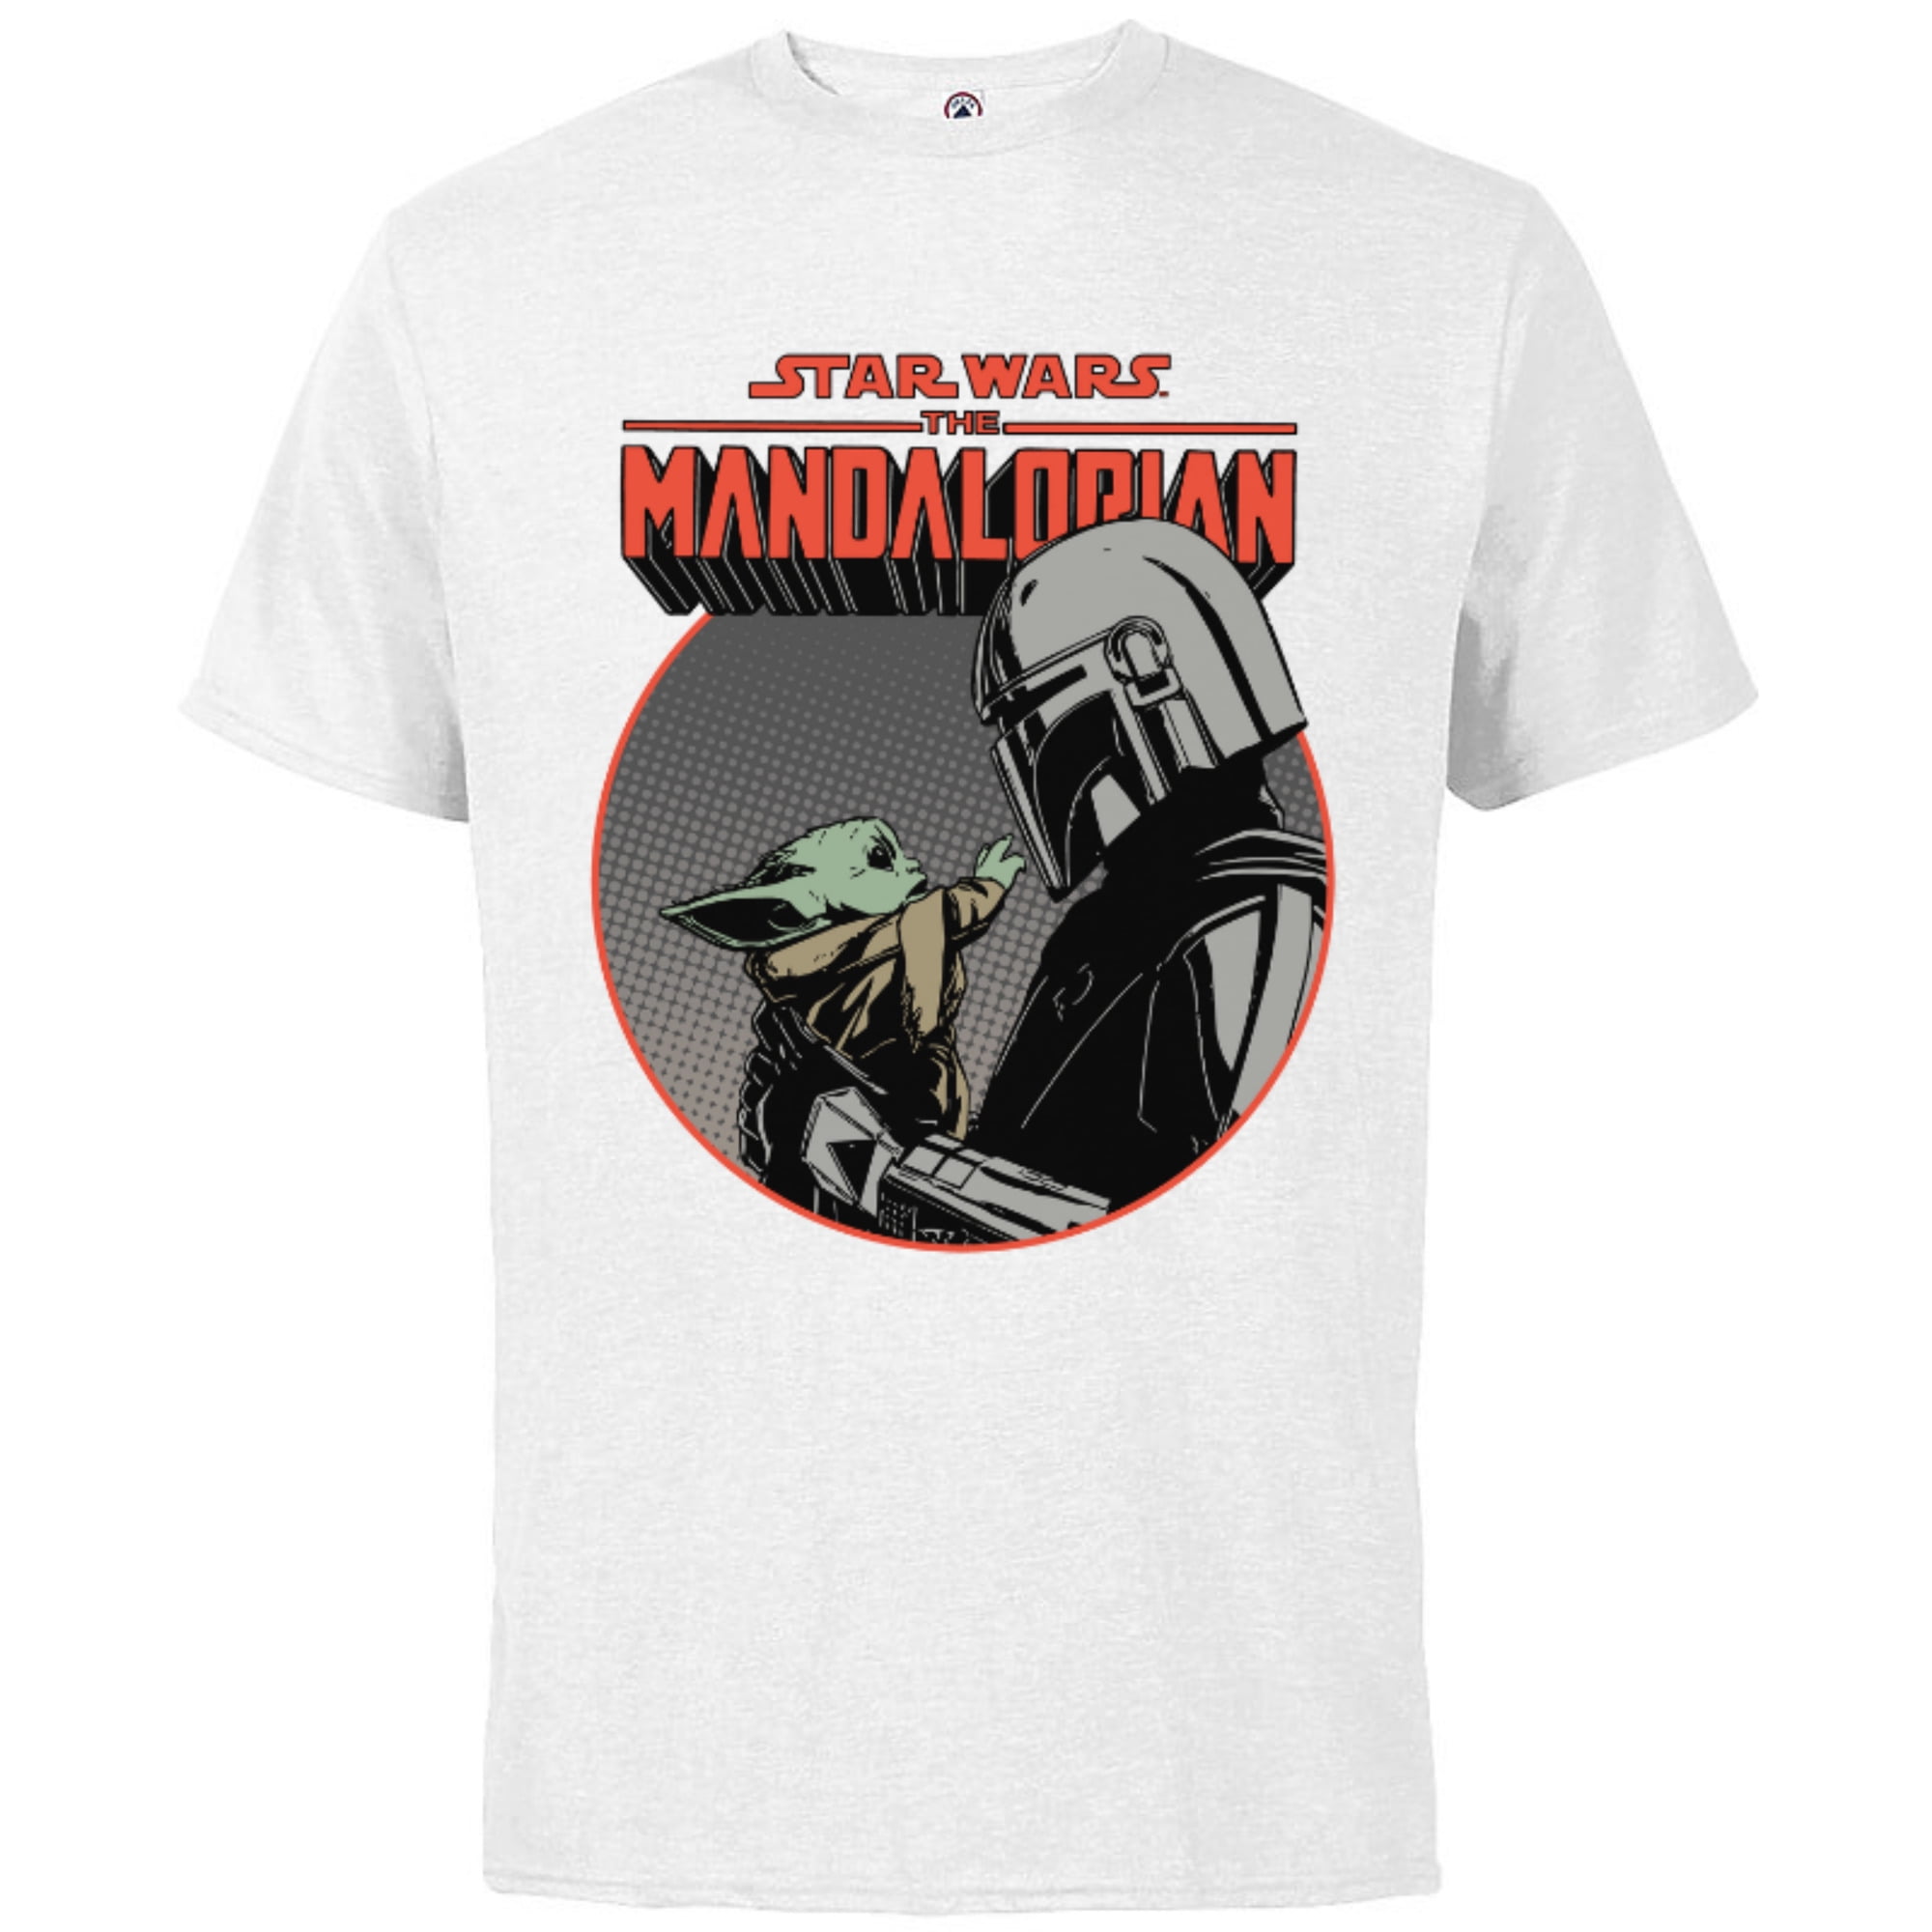 Adults - for Mando Mandalorian and T- Star the Customized-White Retro Sleeve - Short The Wars Shirt Cotton Child